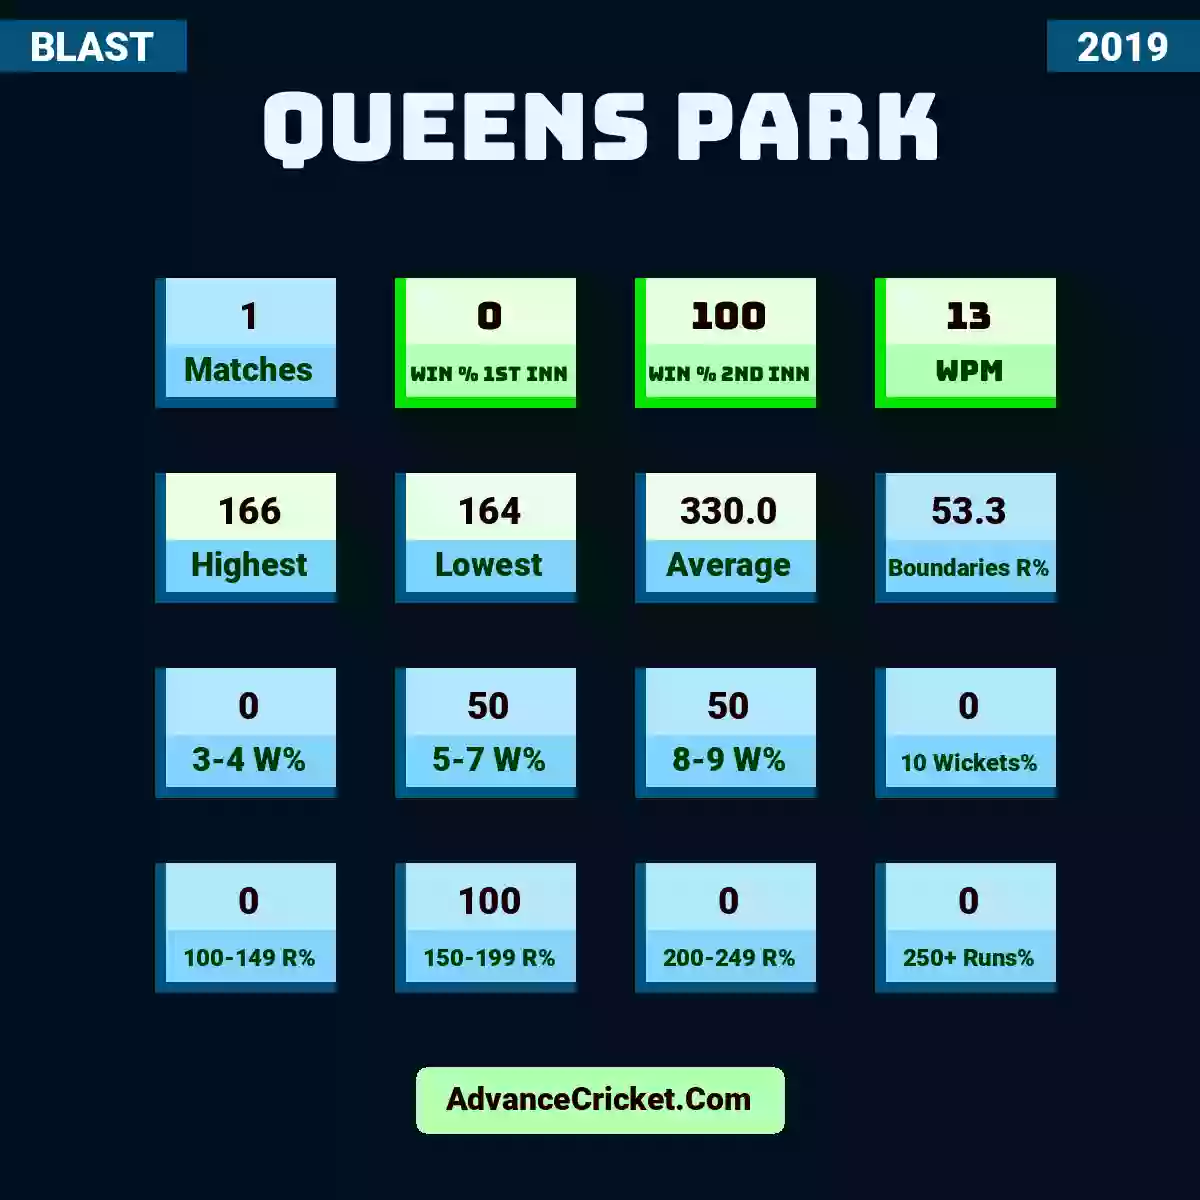 Image showing Queens Park with Matches: 1, Win % 1st Inn: 0, Win % 2nd Inn: 100, WPM: 13, Highest: 166, Lowest: 164, Average: 330.0, Boundaries R%: 53.3, 3-4 W%: 0, 5-7 W%: 50, 8-9 W%: 50, 10 Wickets%: 0, 100-149 R%: 0, 150-199 R%: 100, 200-249 R%: 0, 250+ Runs%: 0.